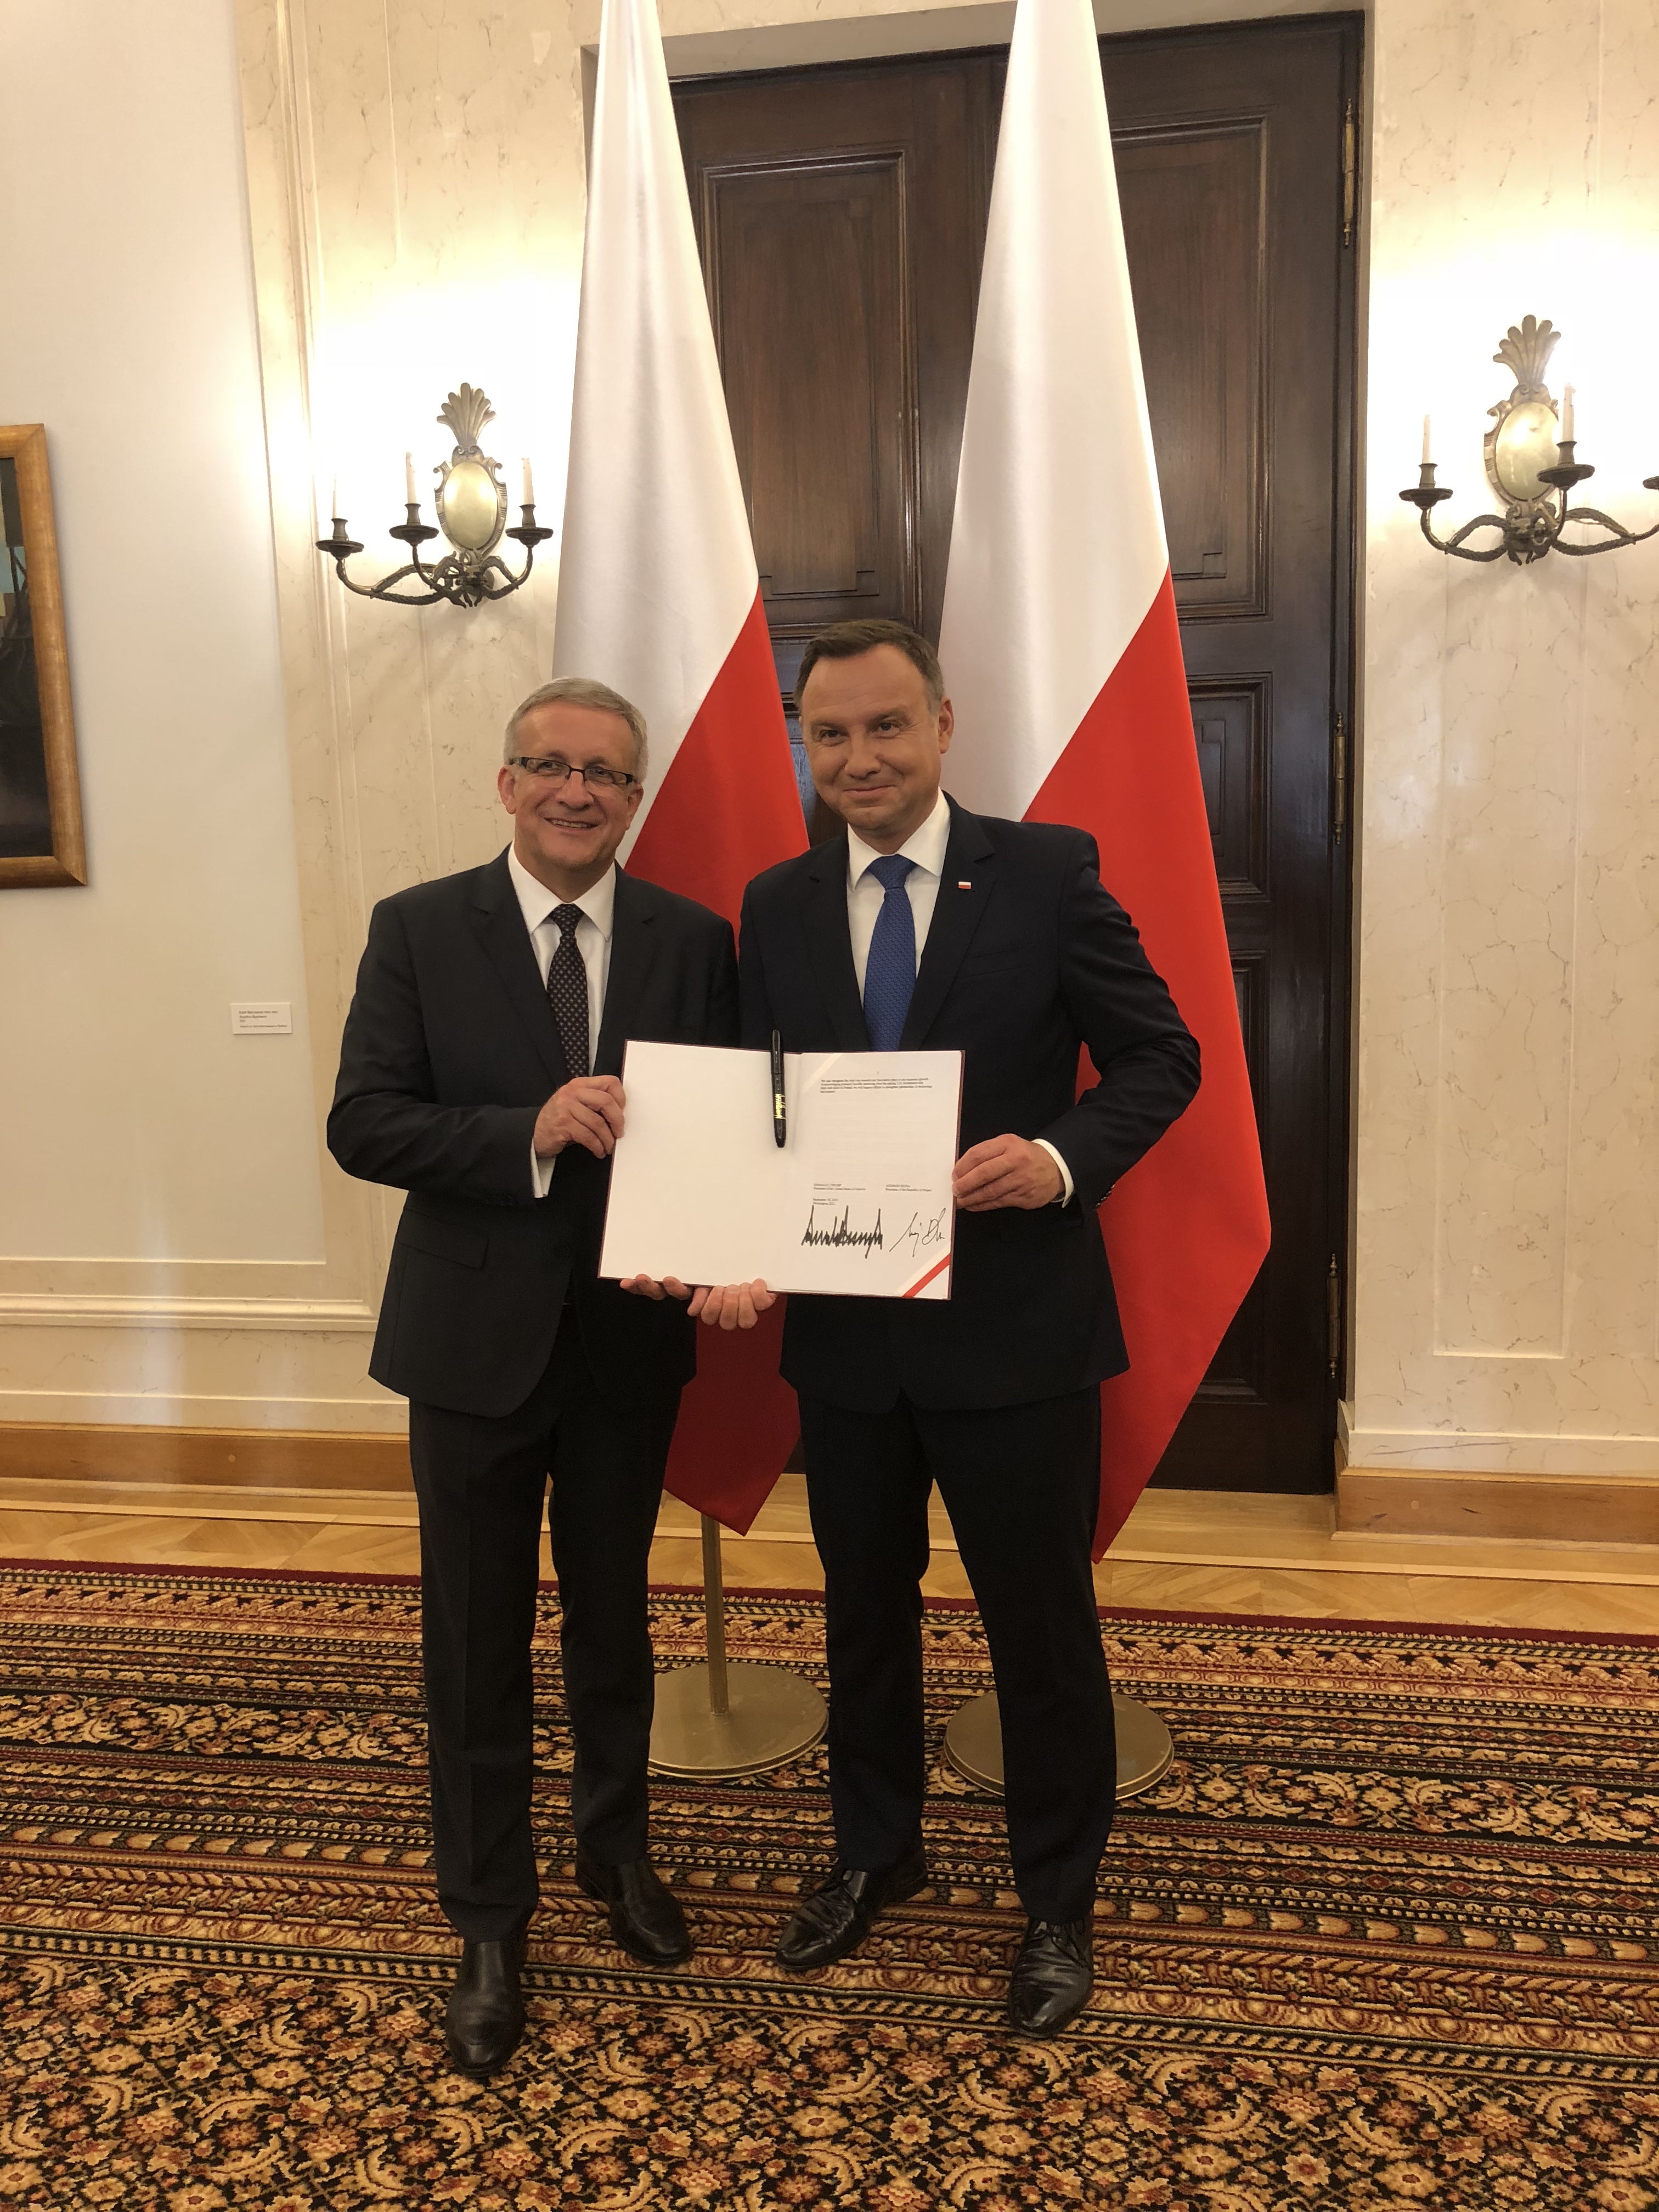 President of Poland gives PSFCU a copy a copy of the Declaration of Cooperation together with the original marker